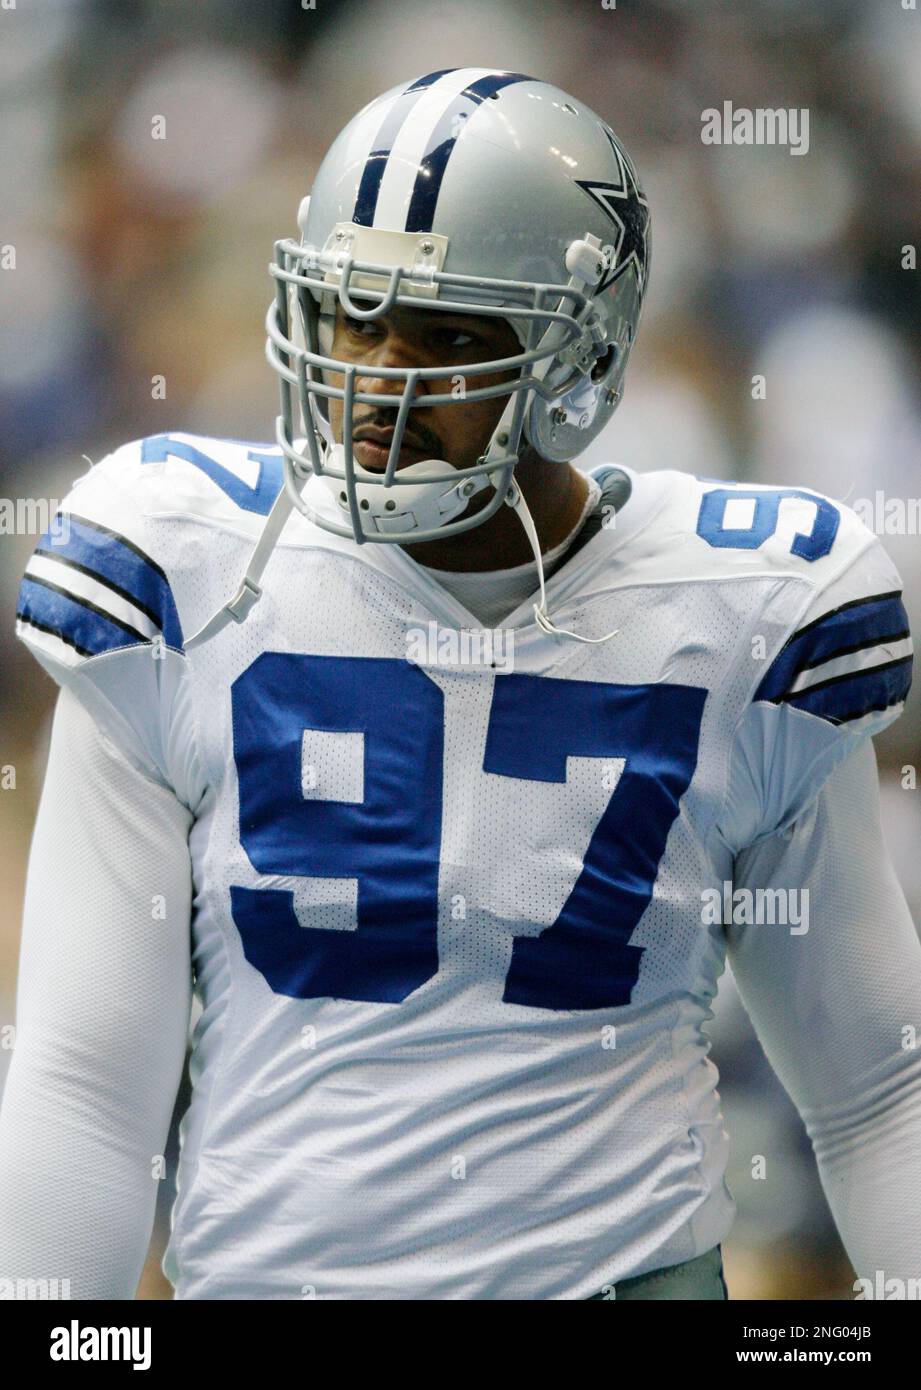 Dallas Cowboys defensive end Jason Hatcher before the start of an